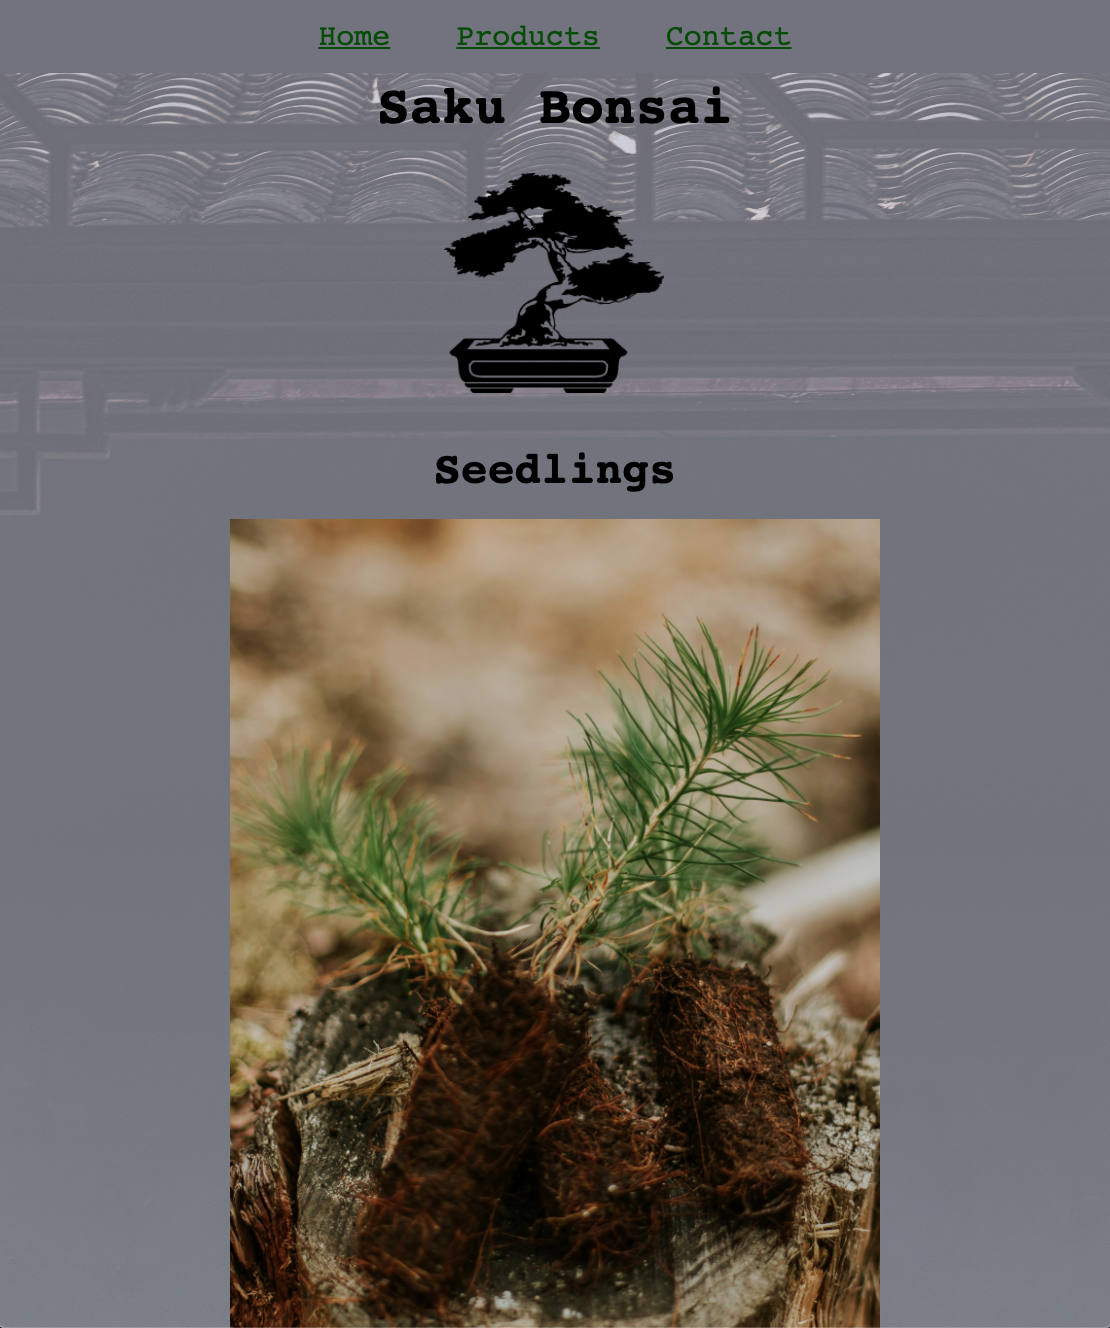 Saku Bonsai product landing page site with black and white icon and seedling picture